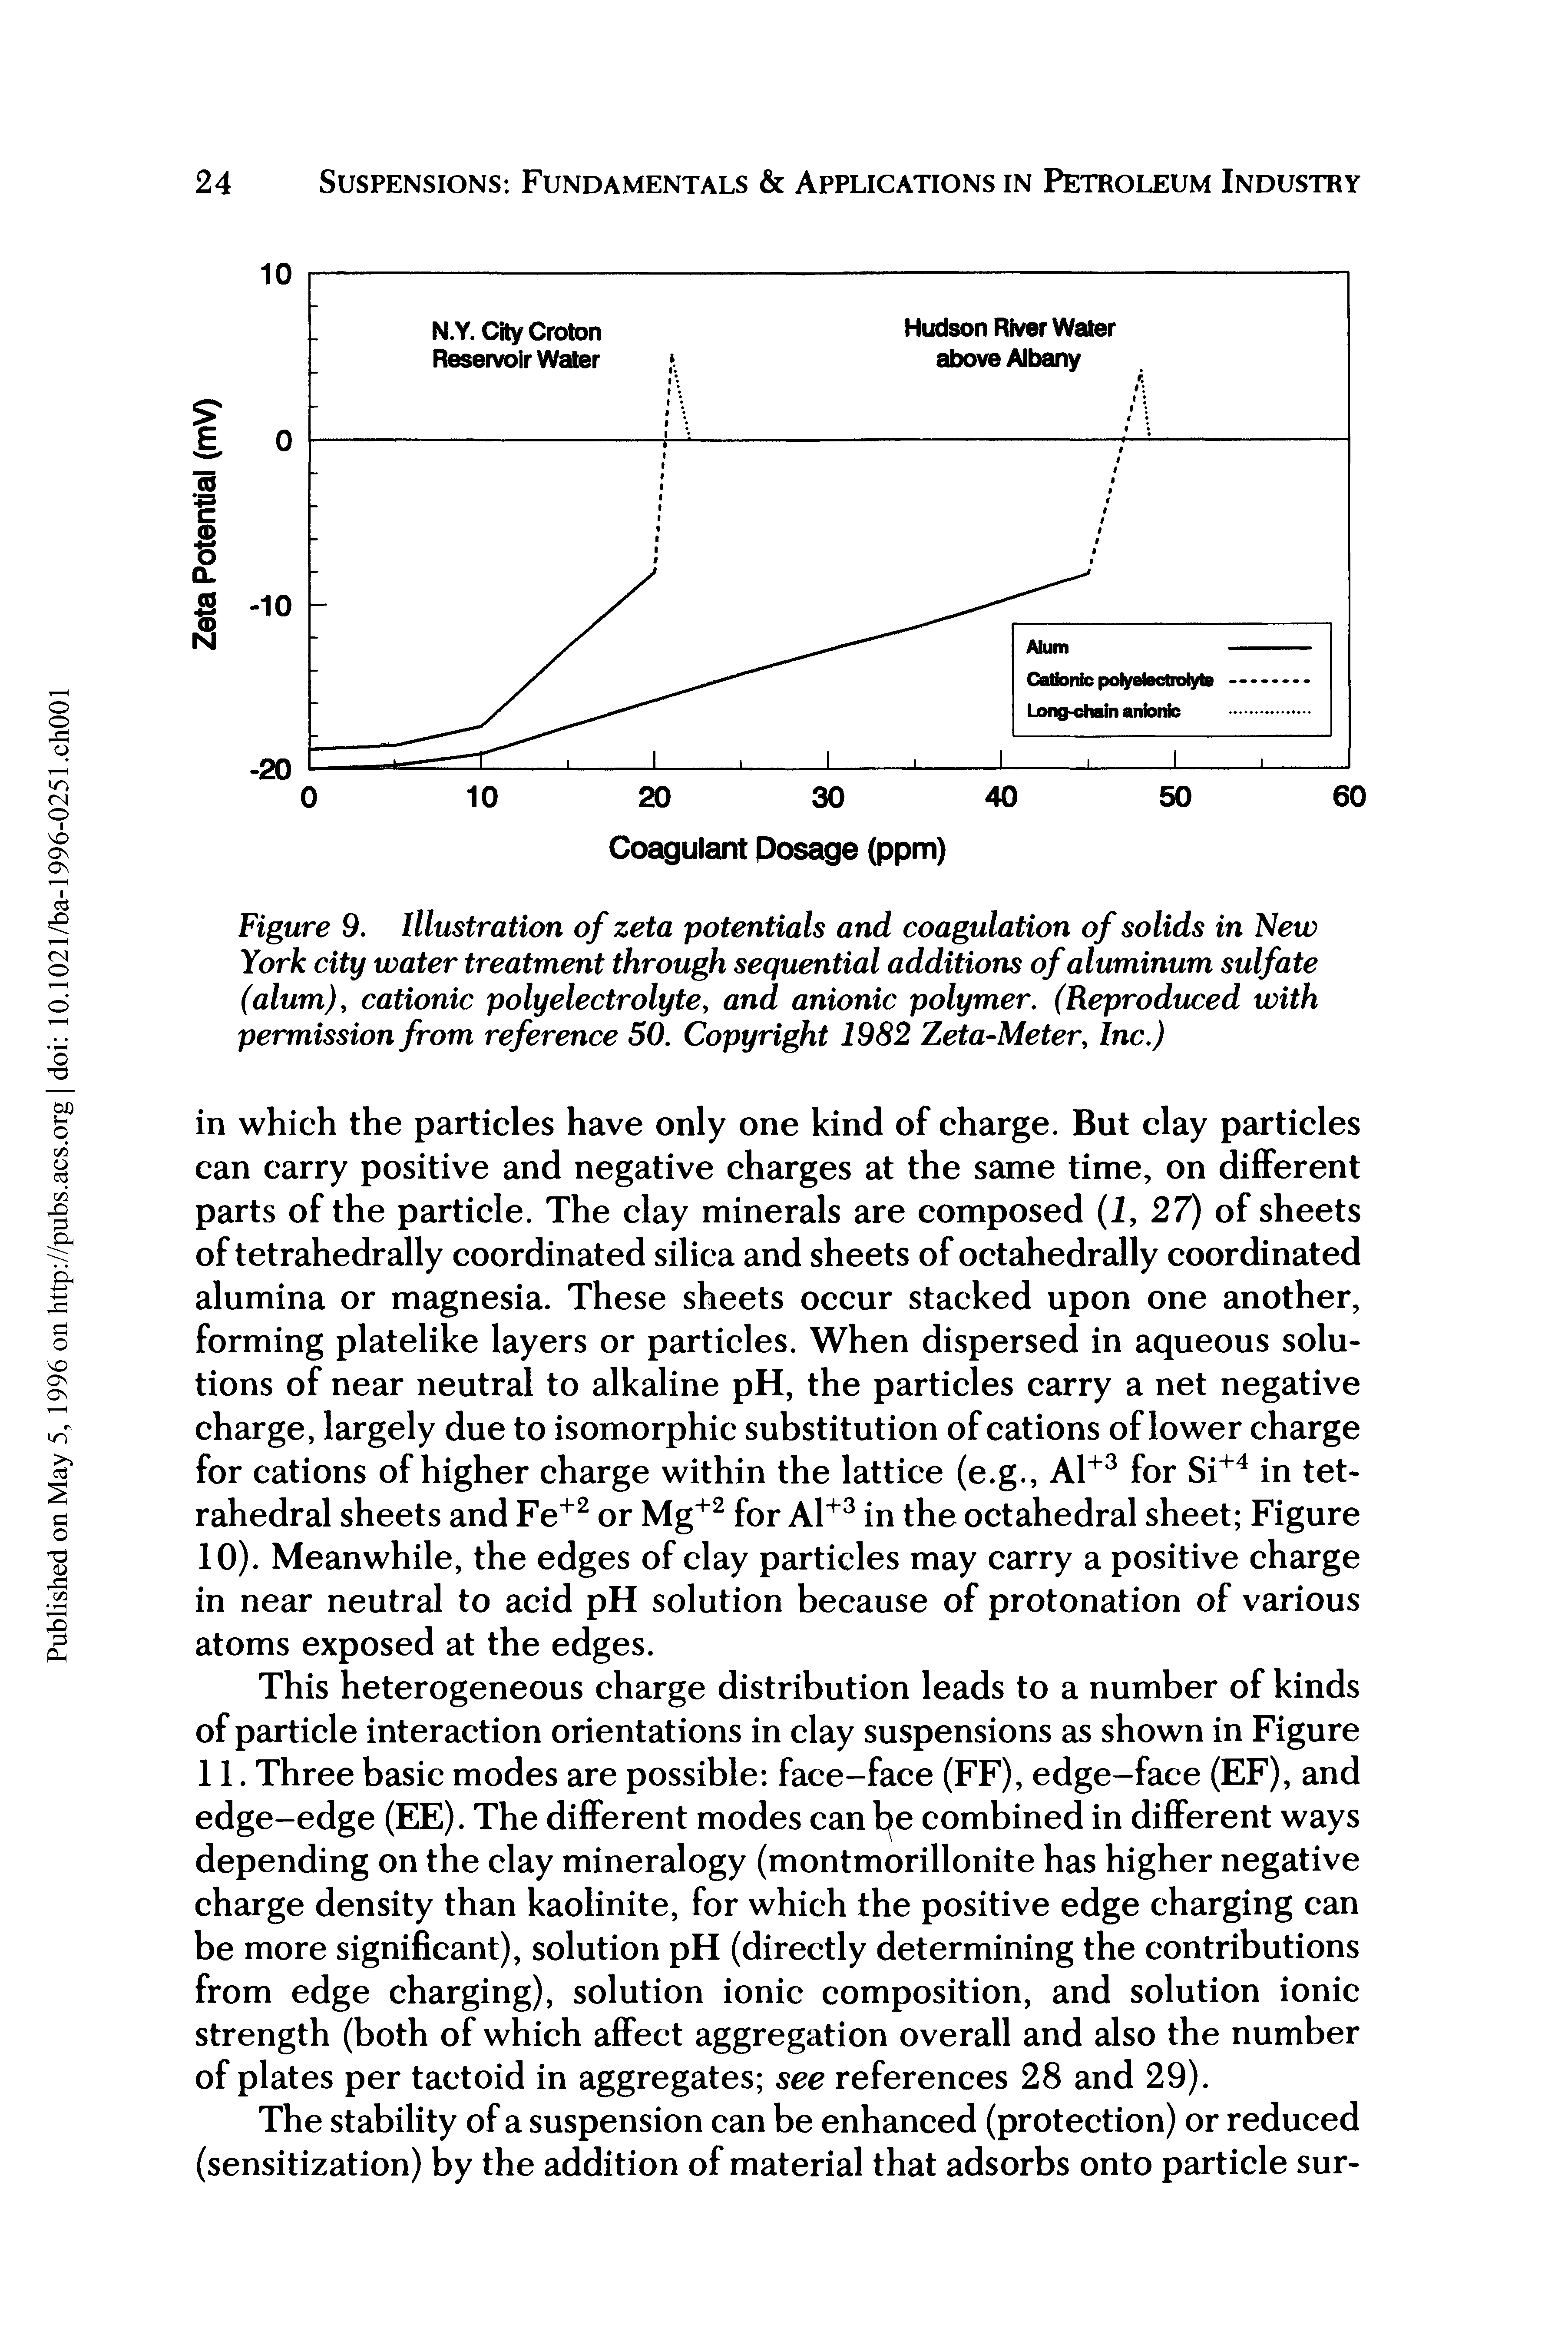 Figure 9. Illustration of zeta potentials and coagulation of solids in New York city water treatment through sequential additions of aluminum sulfate (alum), cationic poly electrolyte, and anionic polymer. (Reproduced with permission from reference 50. Copyright 1982 Zeta-Meter, Inc.)...